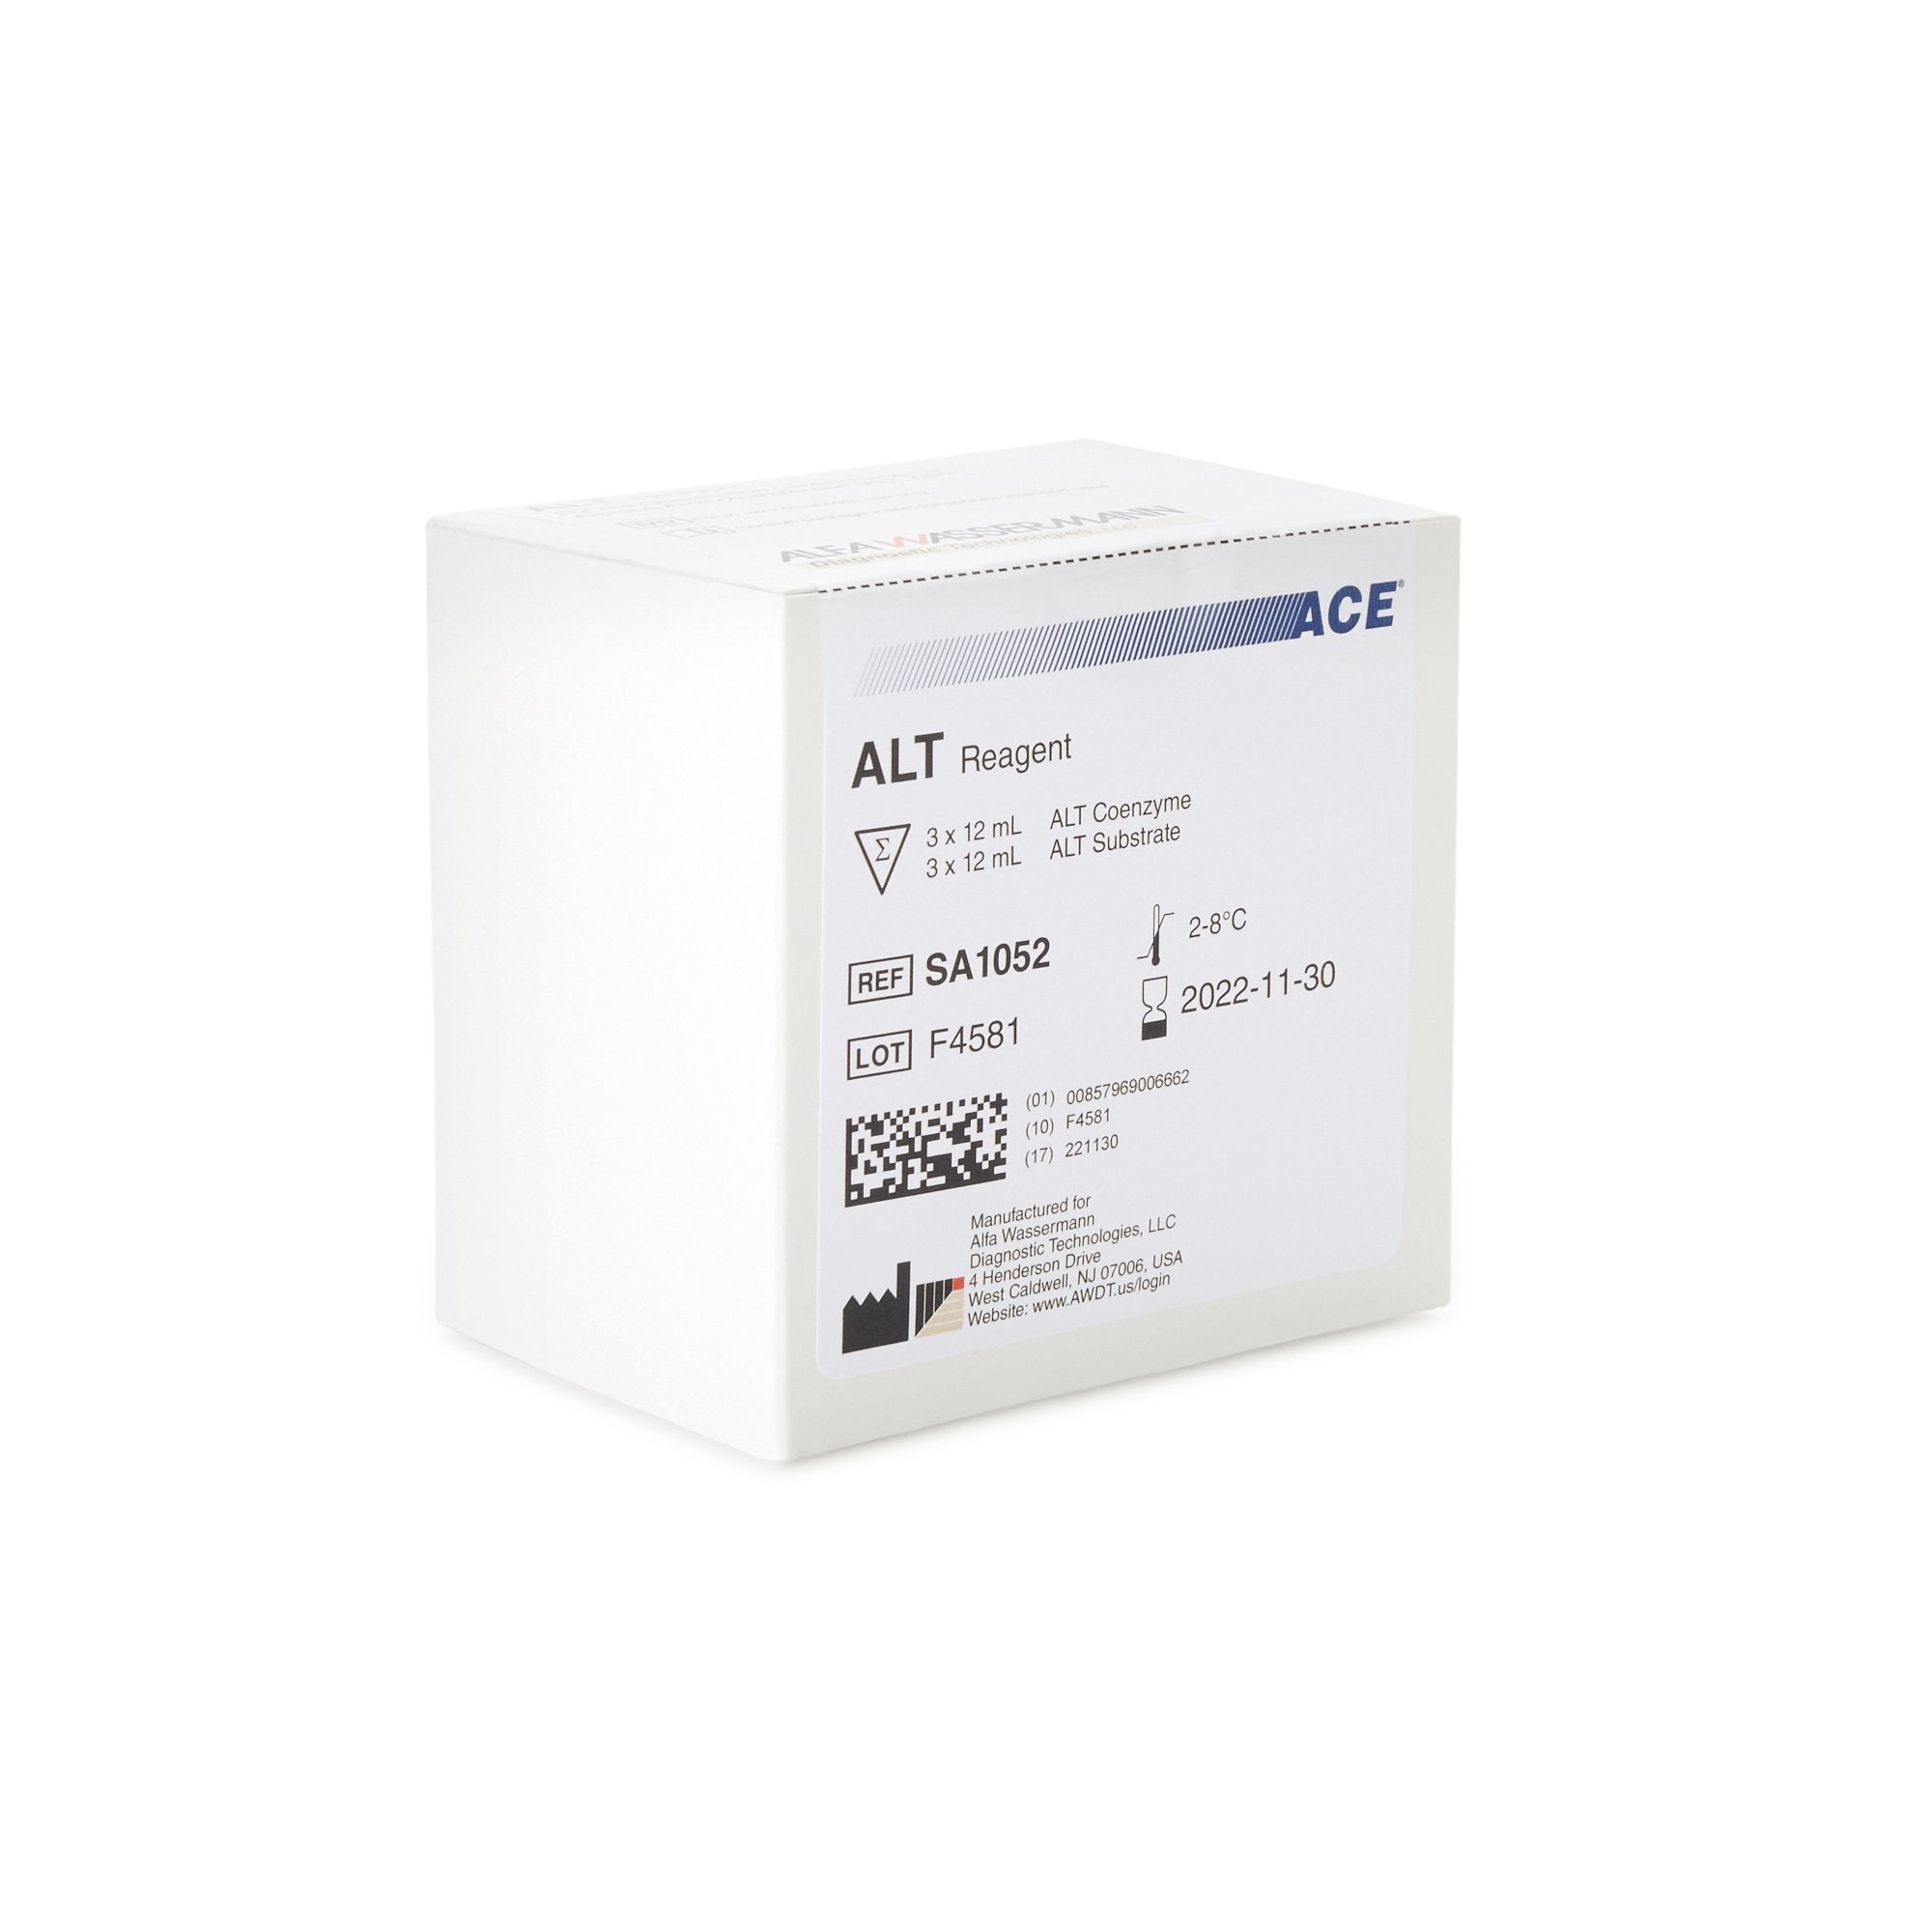 General Chemistry Reagent Alanine Aminotransferase (ALT) For ACE Axcel / ACE Alera Clinical Chemistry Systems 450 Tests